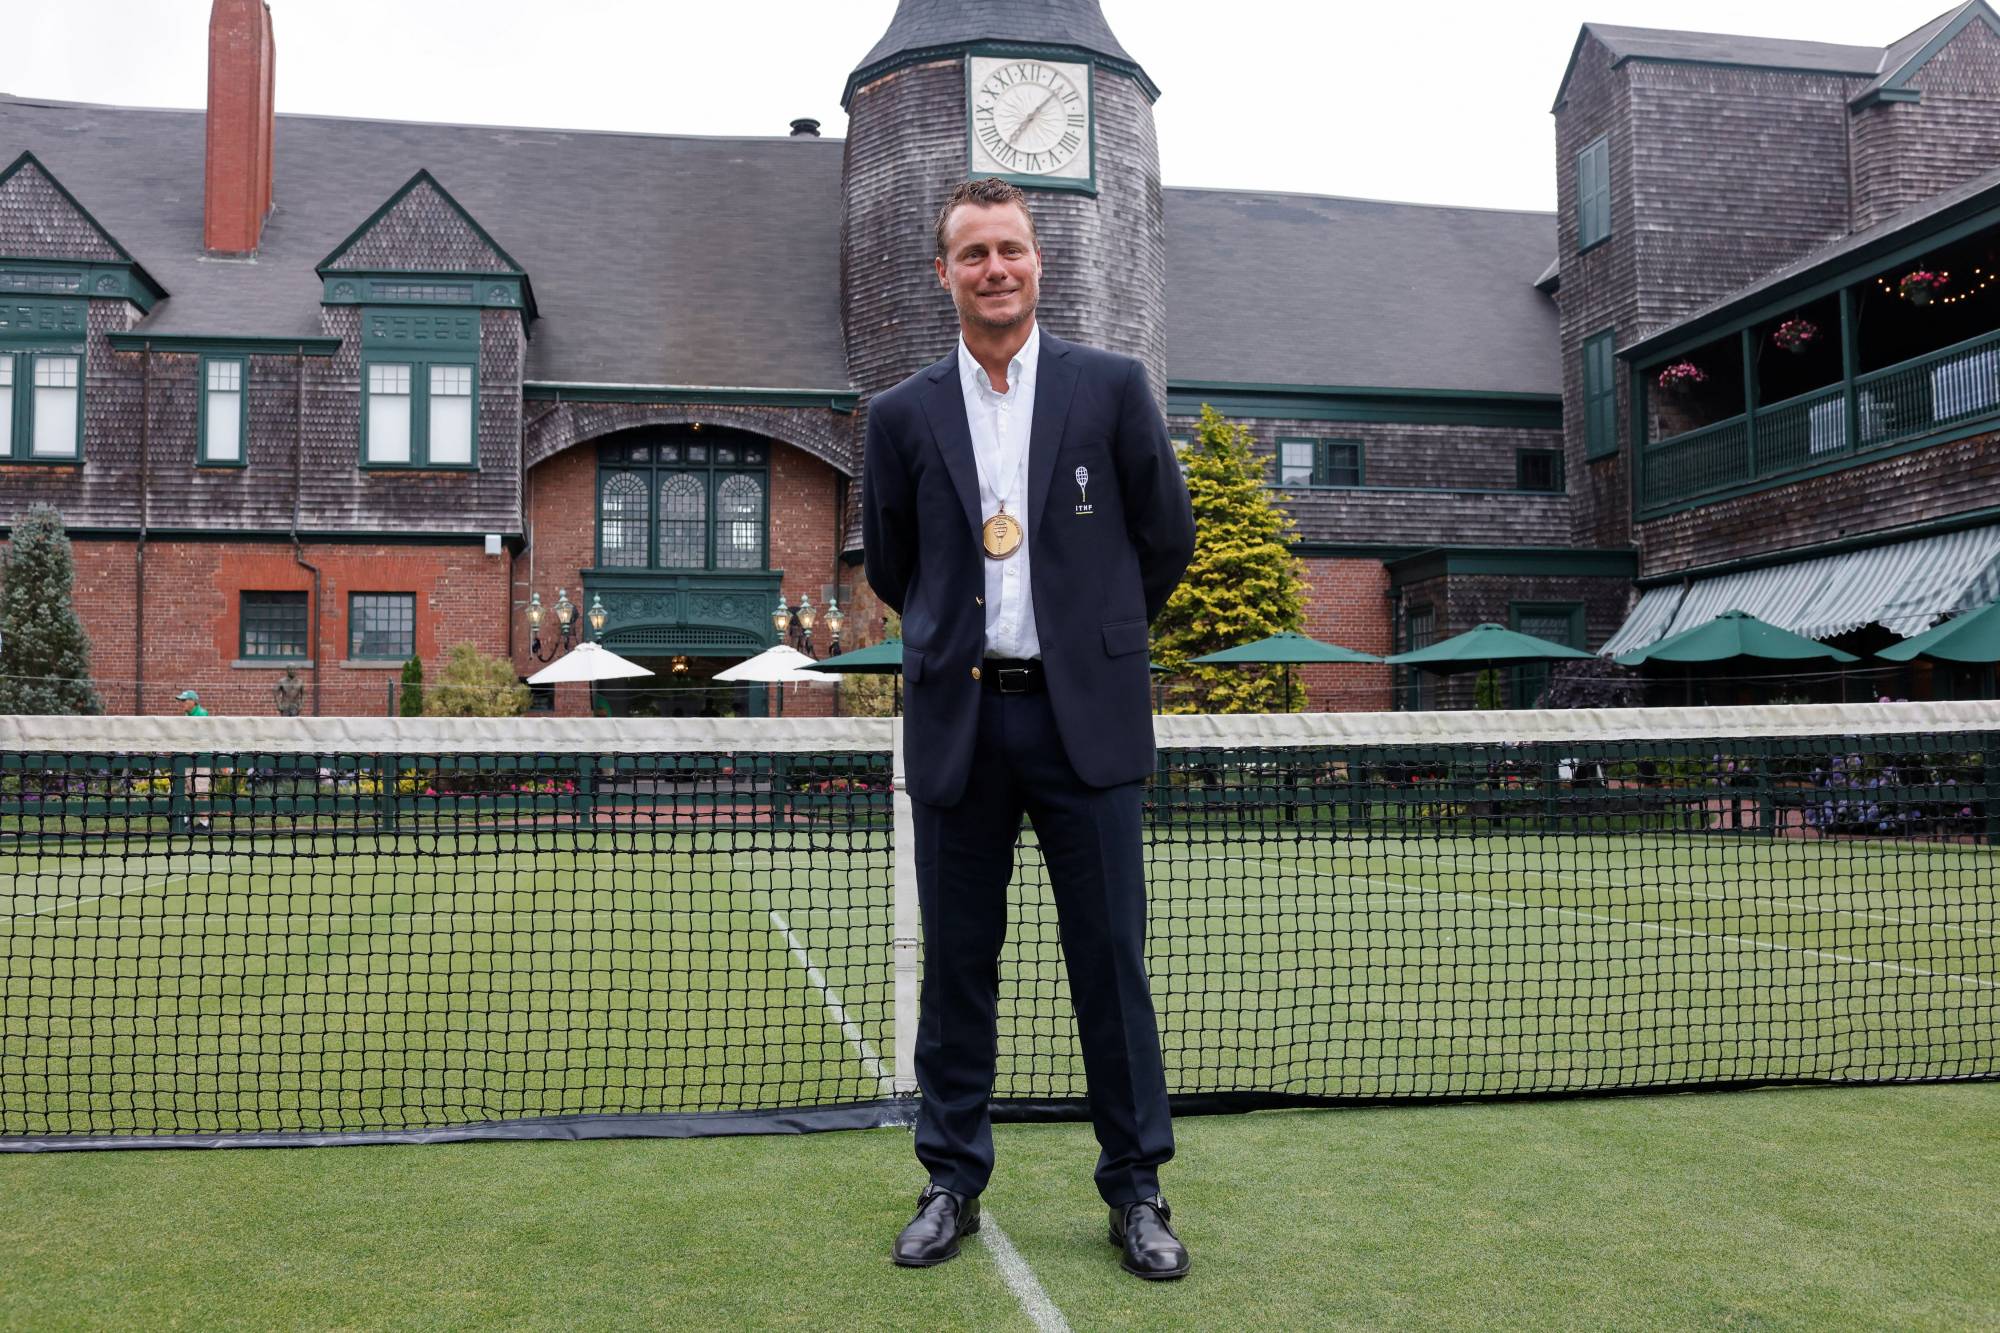 Australia Tennis star Lleyton Hewitt inducted into Hall of Fame